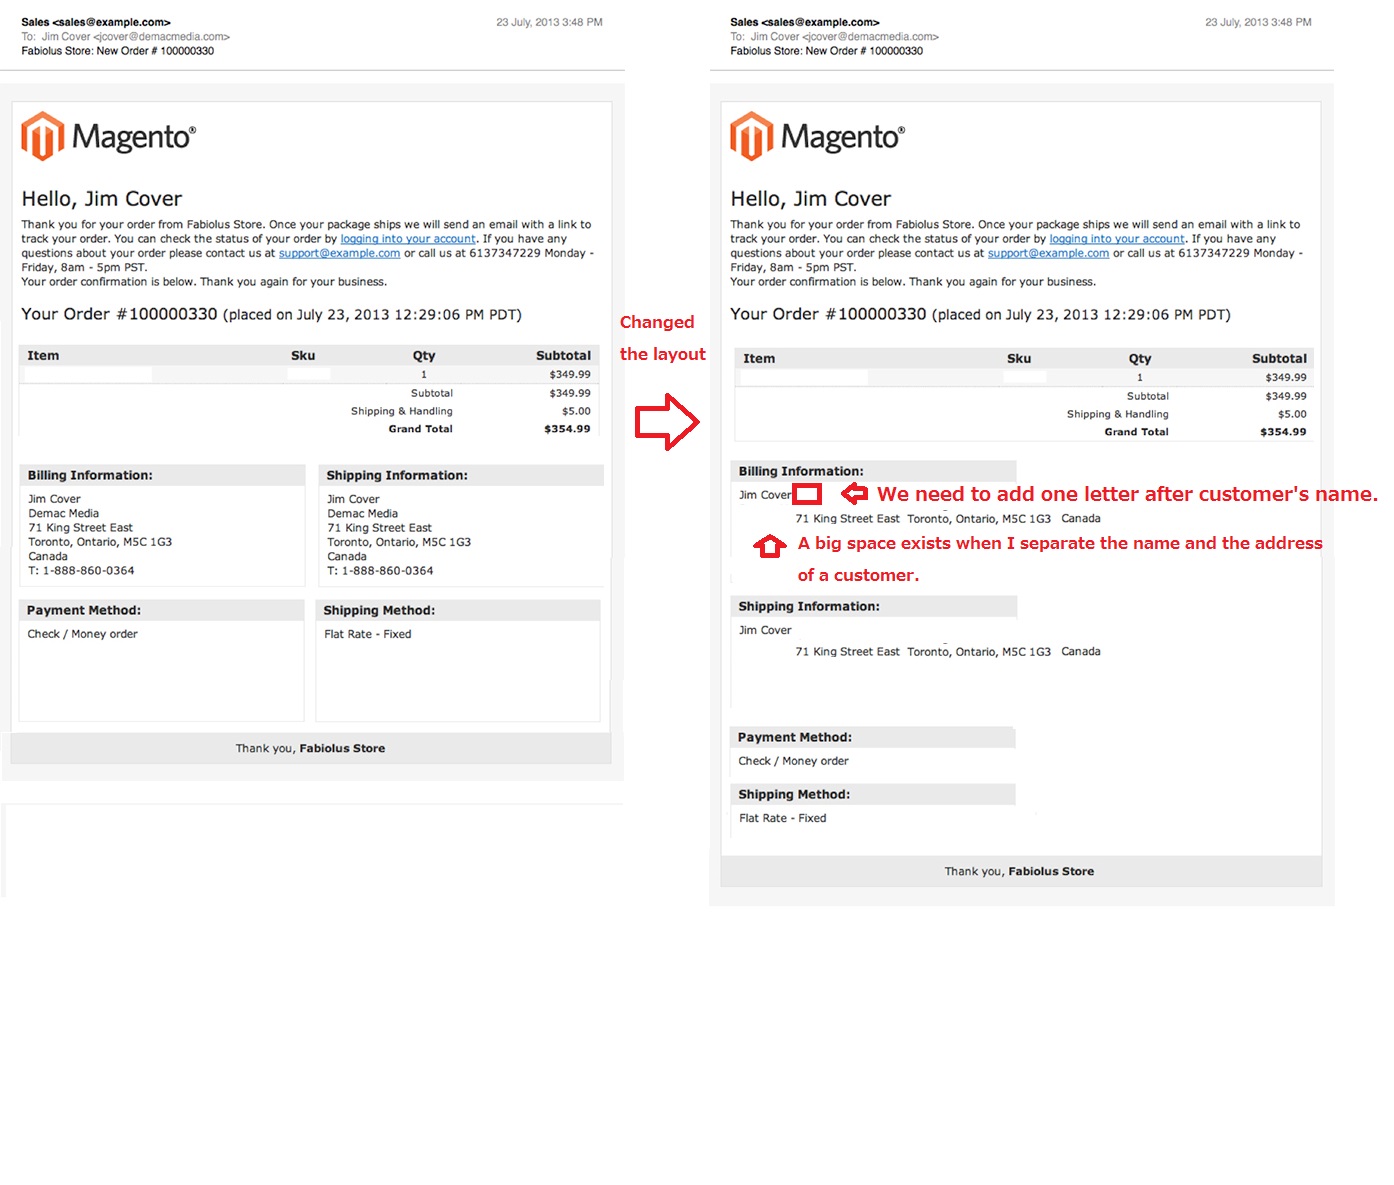 Changing the layout of new order email - Magento Forums